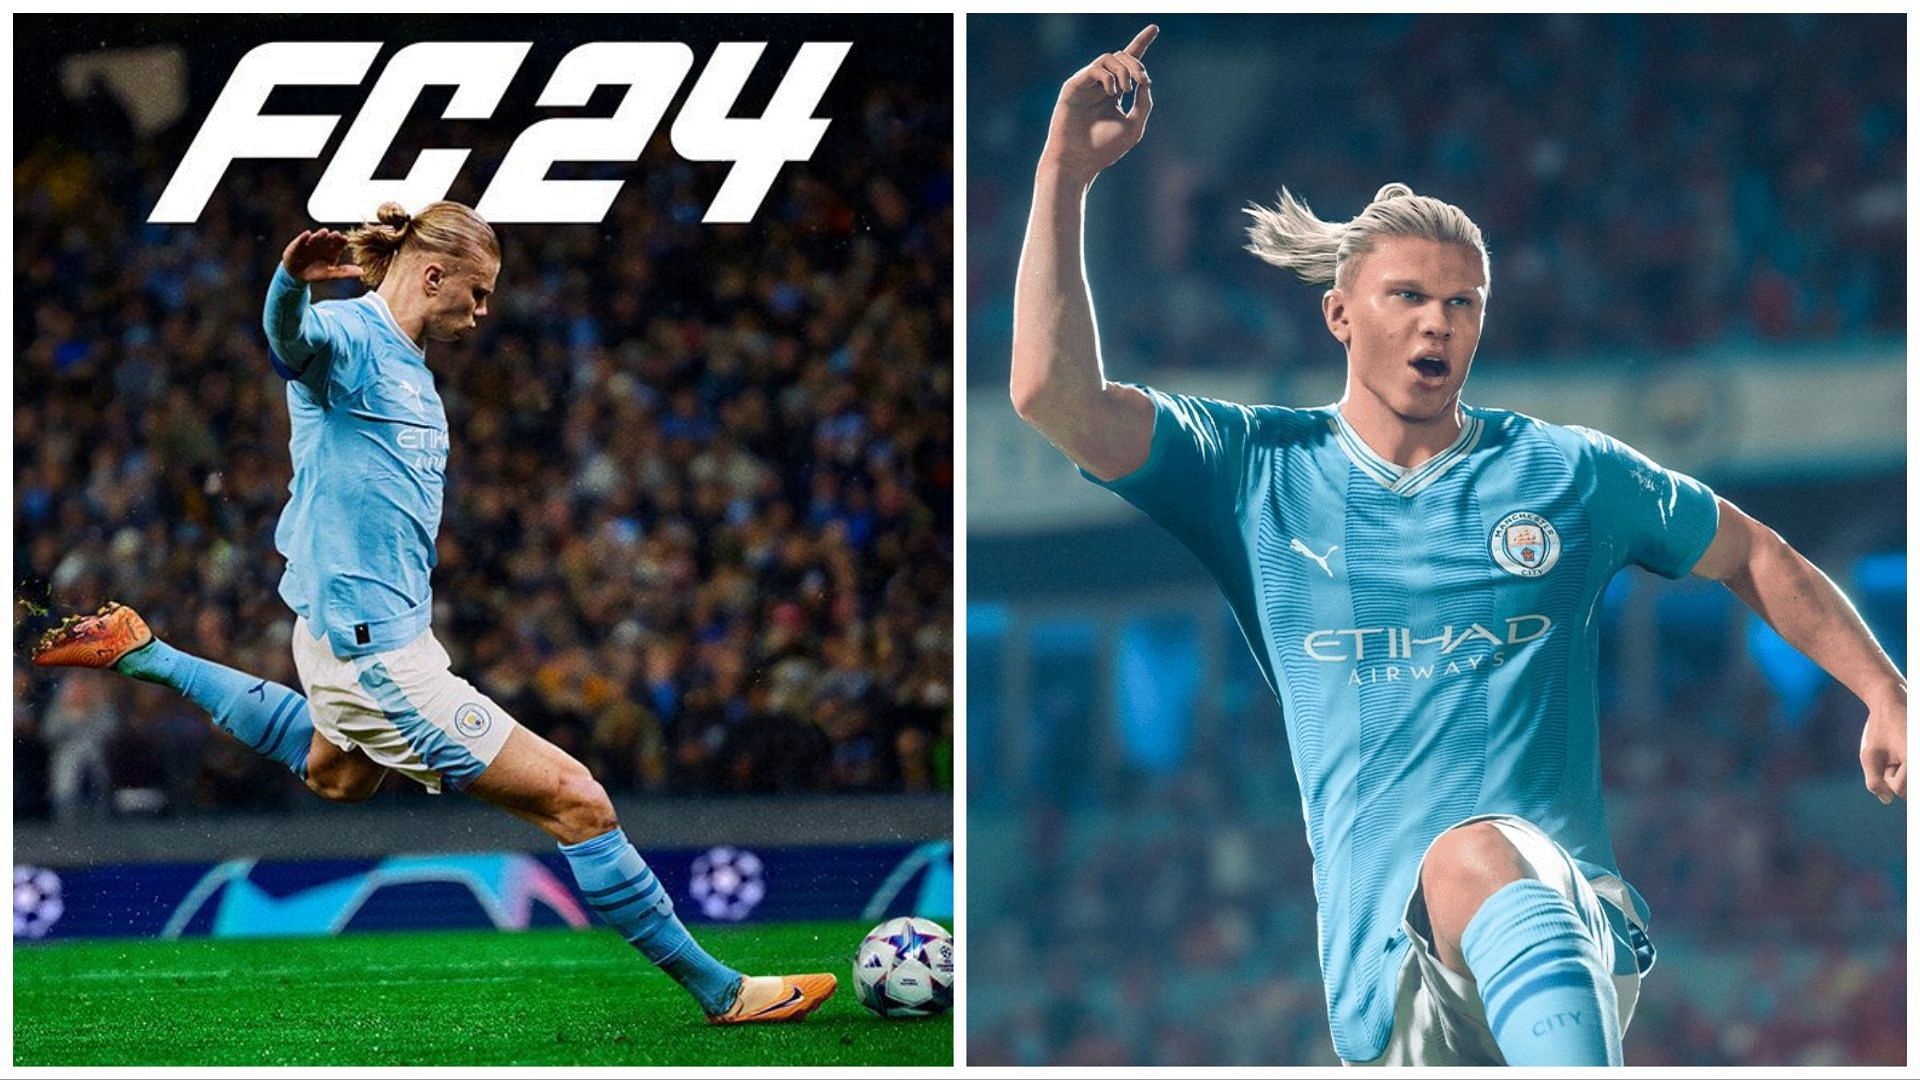 EA FC 24 will feature a host of changes (Images via EA Sports)